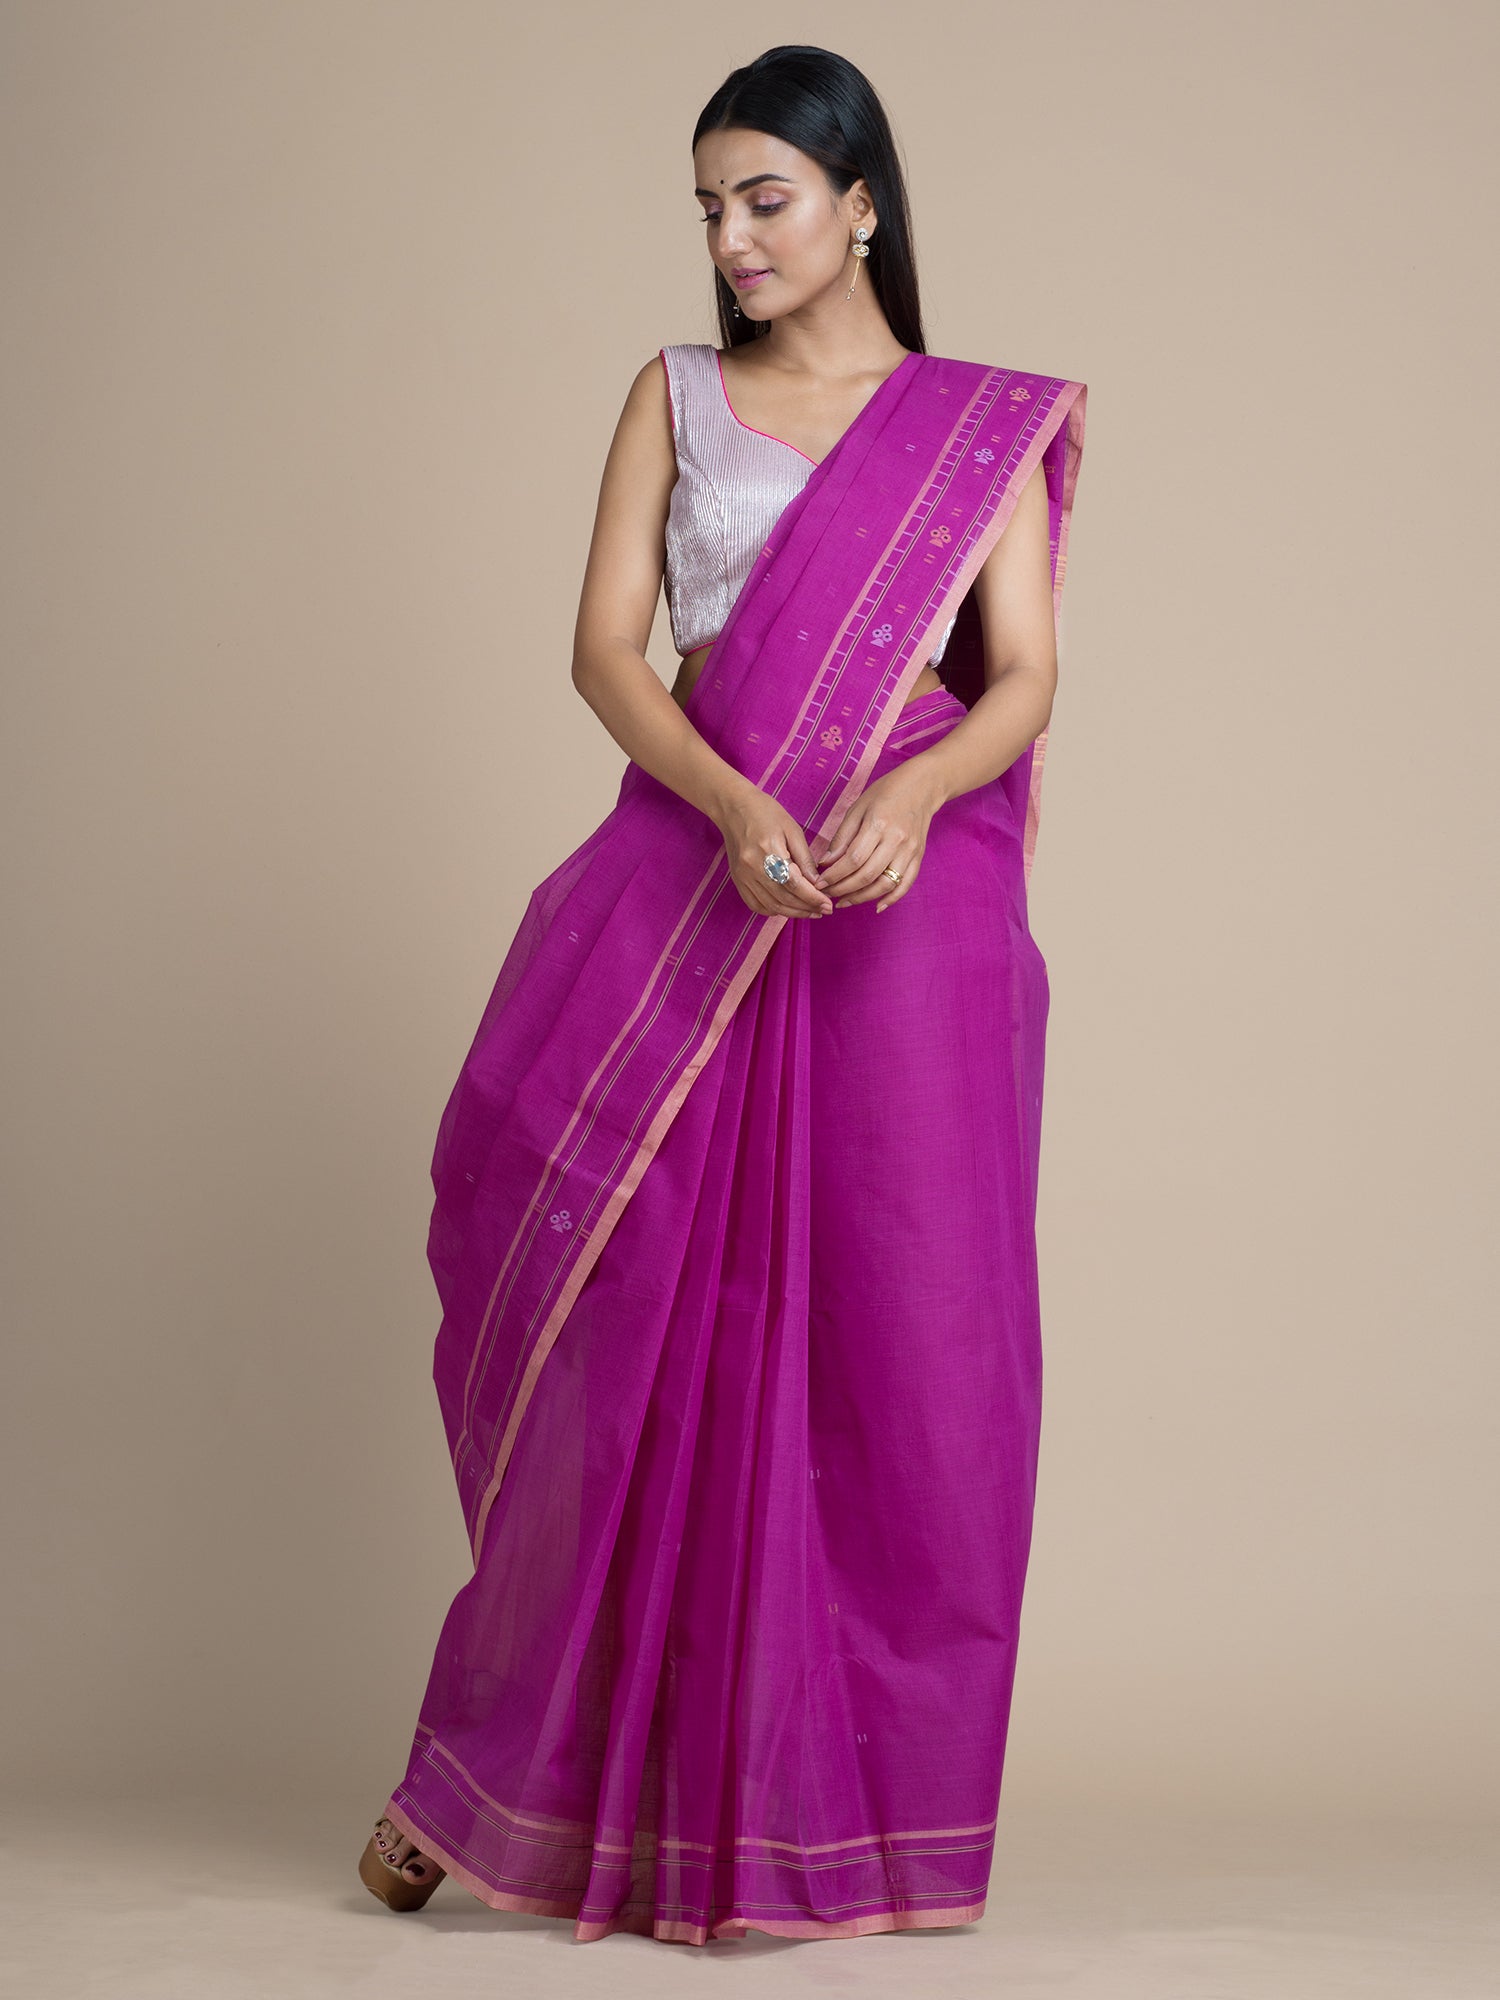 Women's Magenta Pure Cotton Hand Woven Saree With Buti Work Without Blouse-Sajasajo